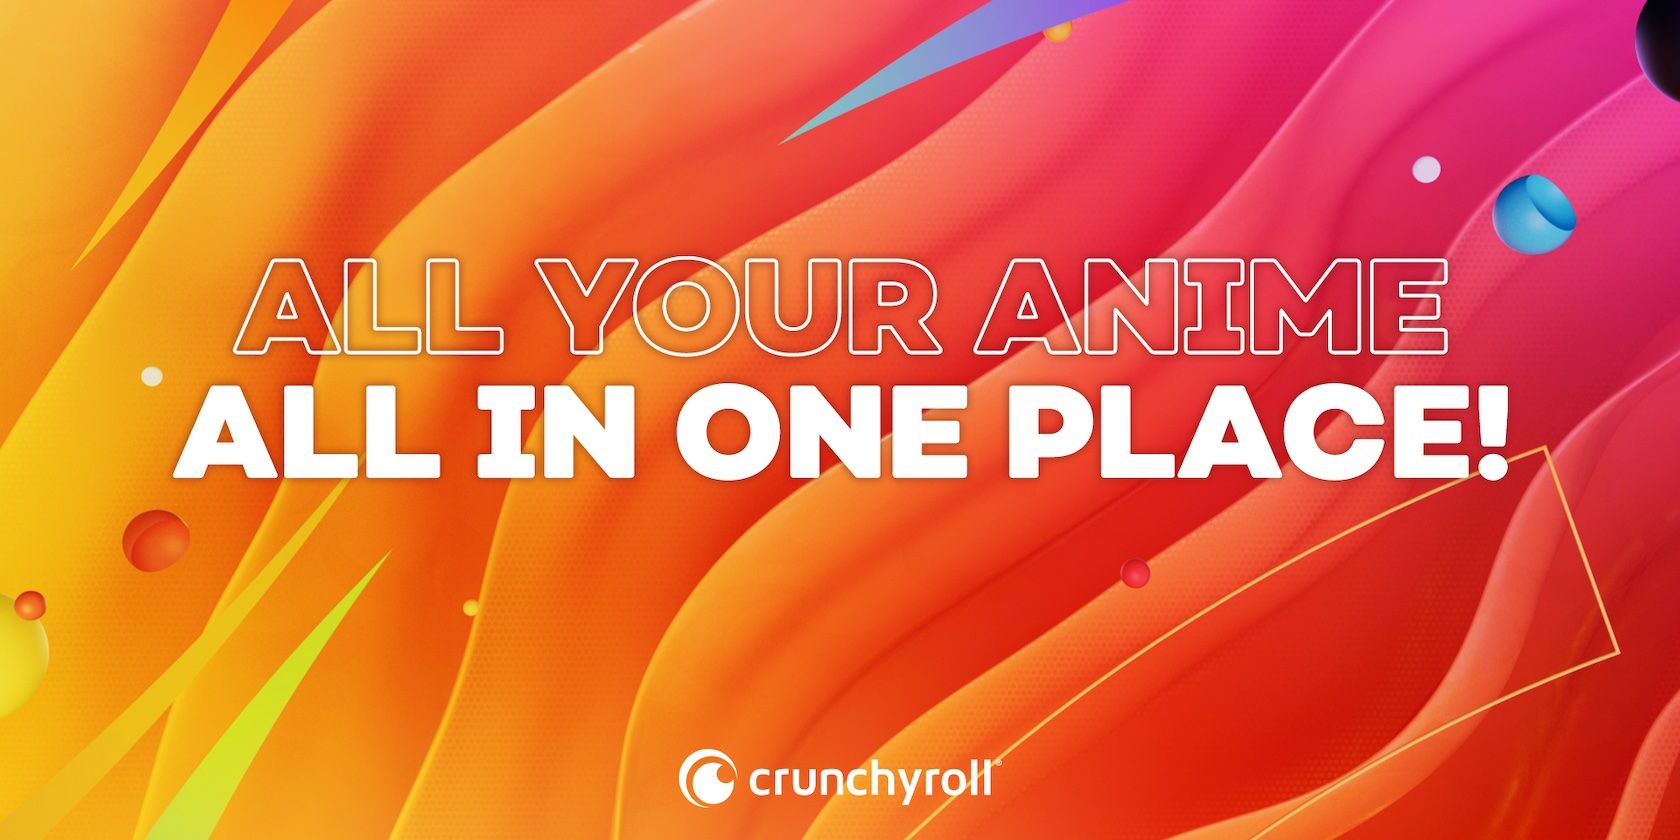 All-Your-Anime-In-One-Place-Crunchyroll-